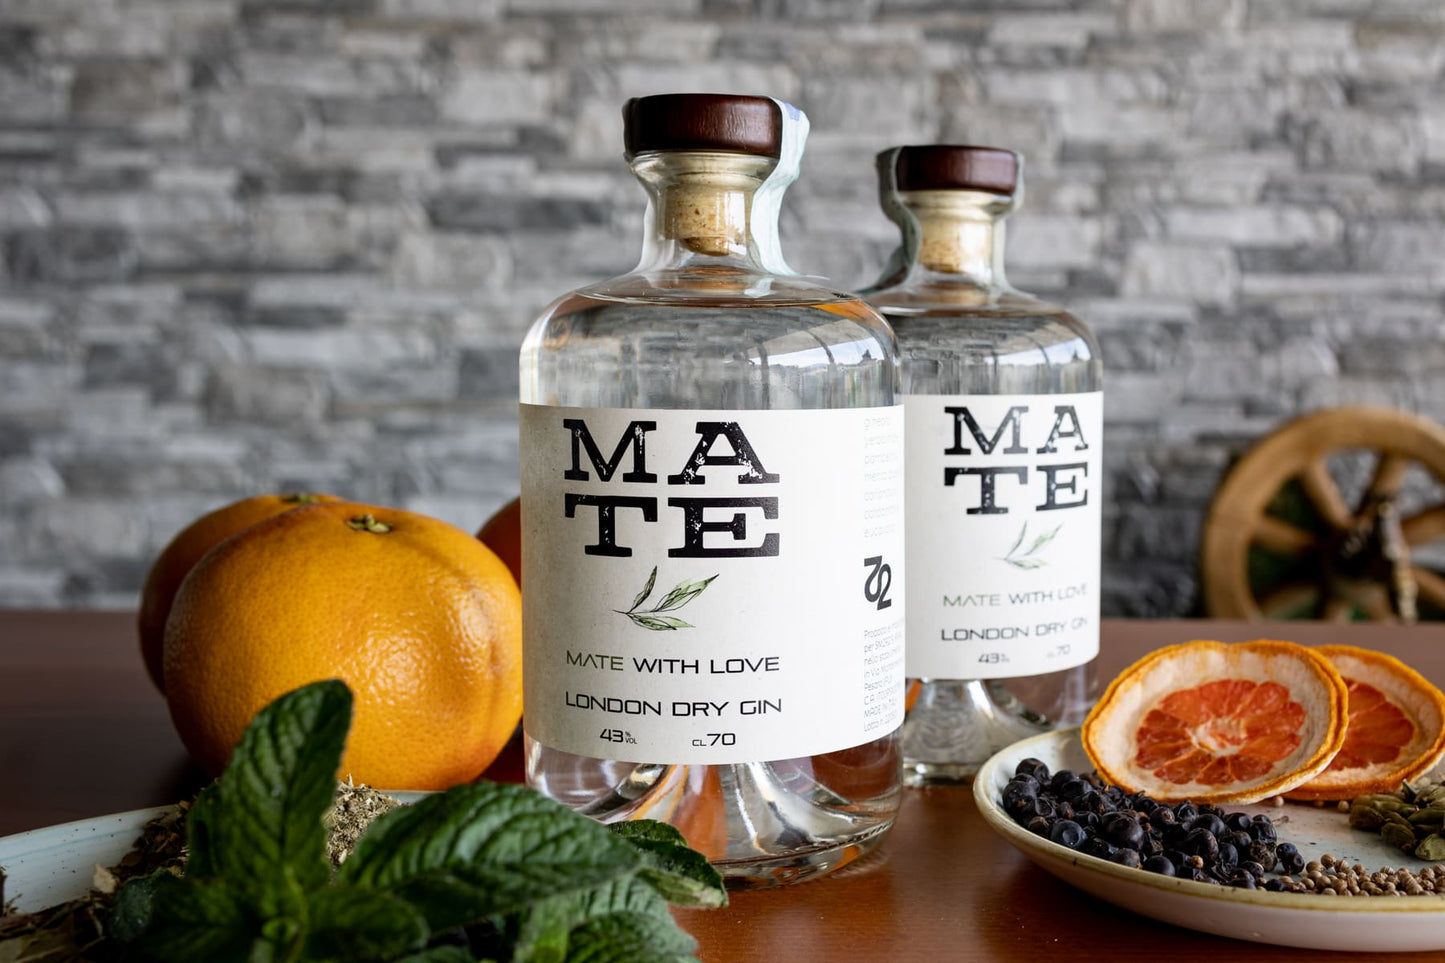 MATE LONDON DRY GIN - MATE WITH LOVE